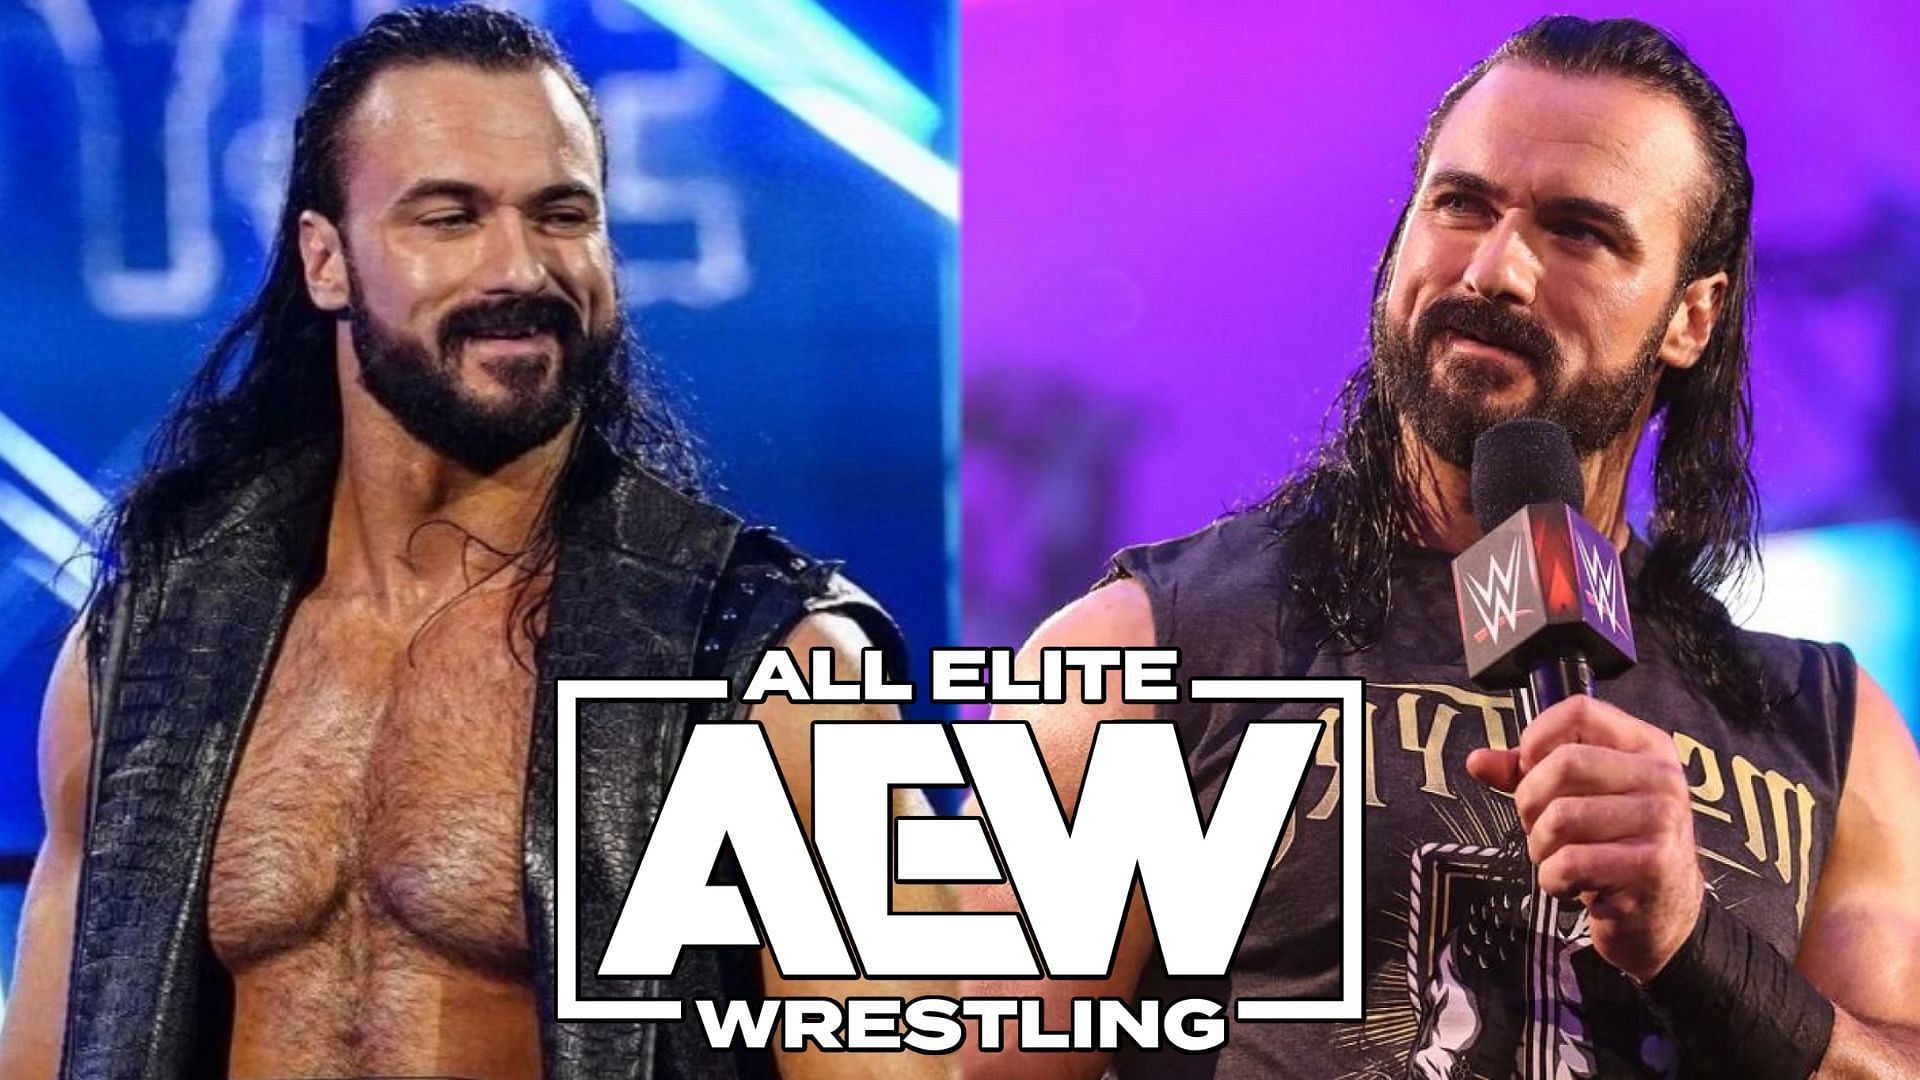 Could Drew McIntyre continue his heated feud with this star?